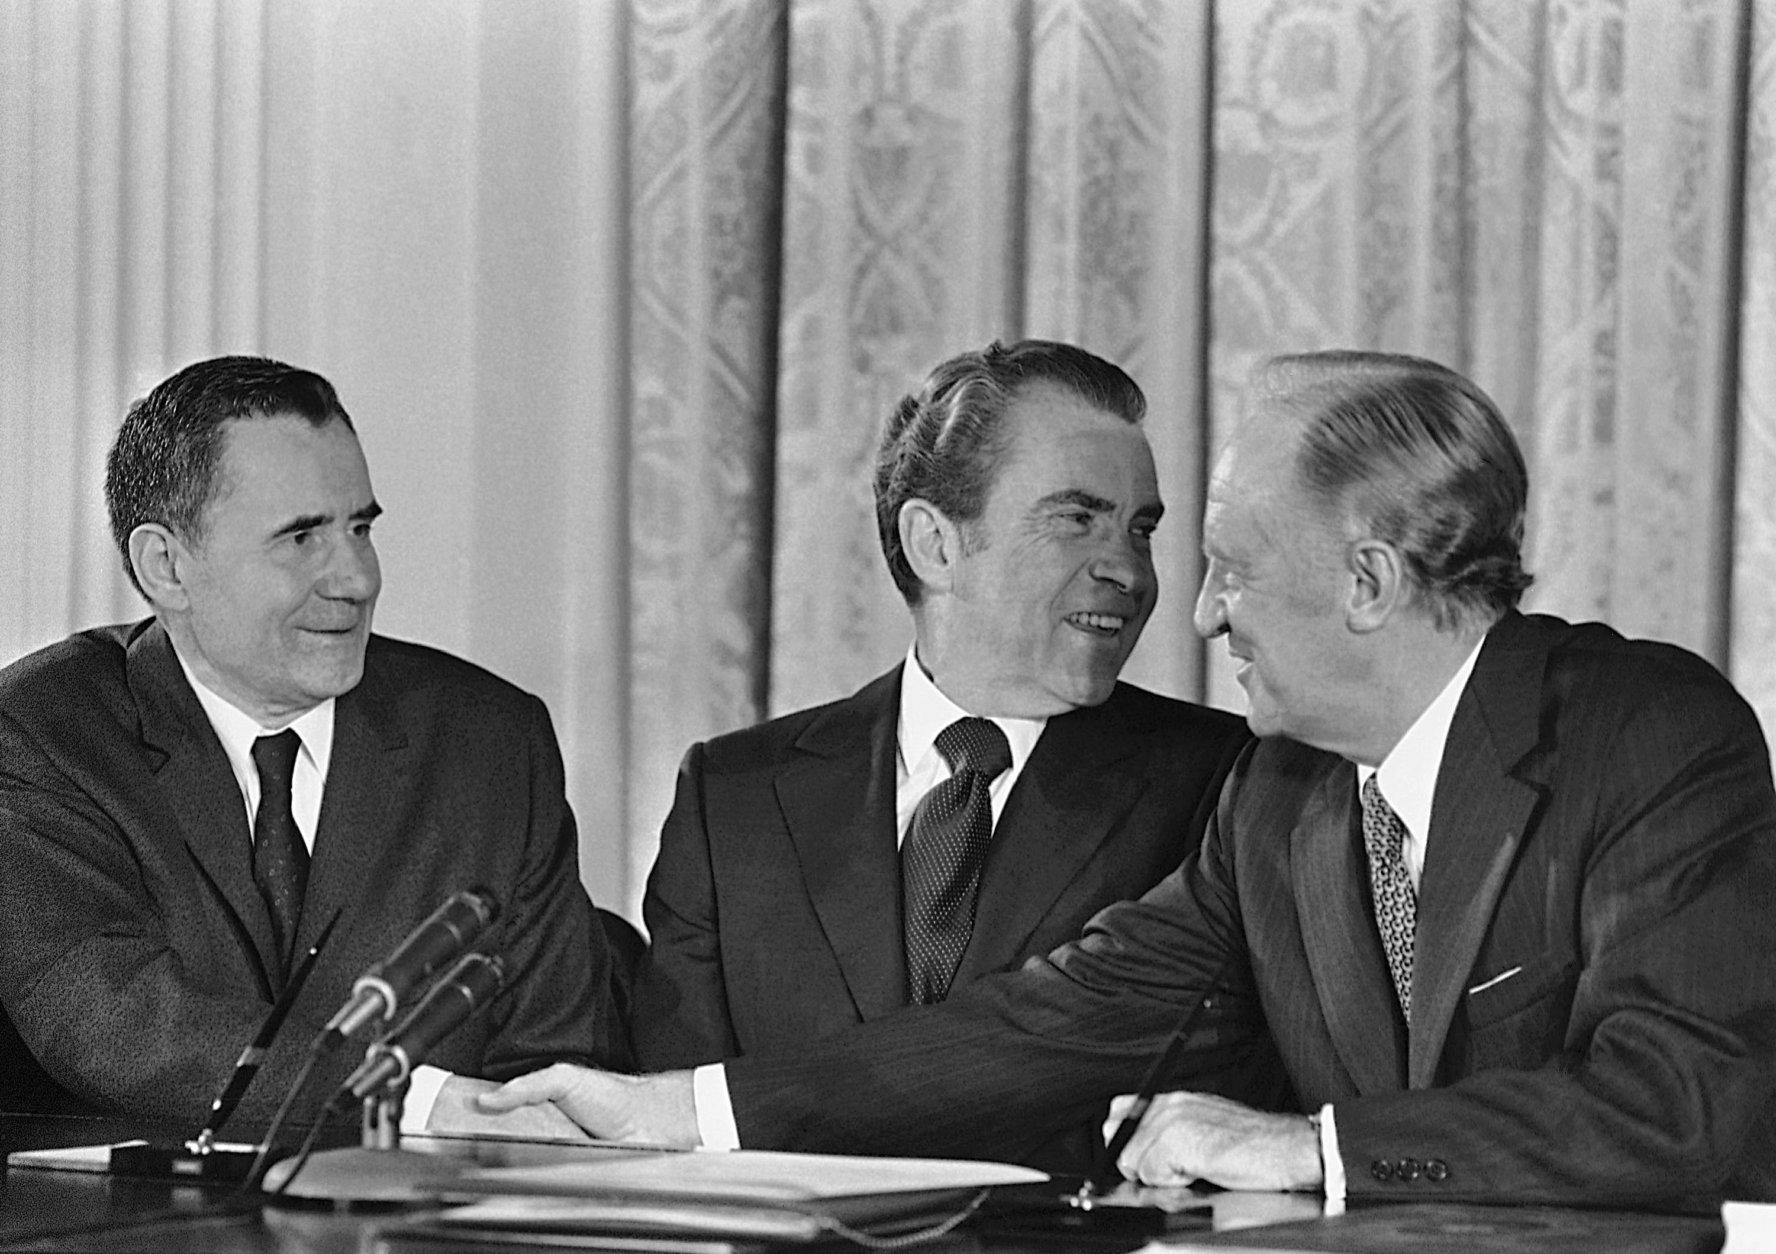 U.S. President Richard Nixon after signing the formal proclamation declaring the United States and Soviet Union have bound themselves by treaty to curb their anti ballistic-missile activities. He announced a souvenir pen would be given to all participants at the ceremony in the White House East Room, Washington on Oct. 3, 1972. At left is Soviet Foreign Minister Andrei Gromyko. Man at right is unidentified. (AP Photo/Henry Burroughs)